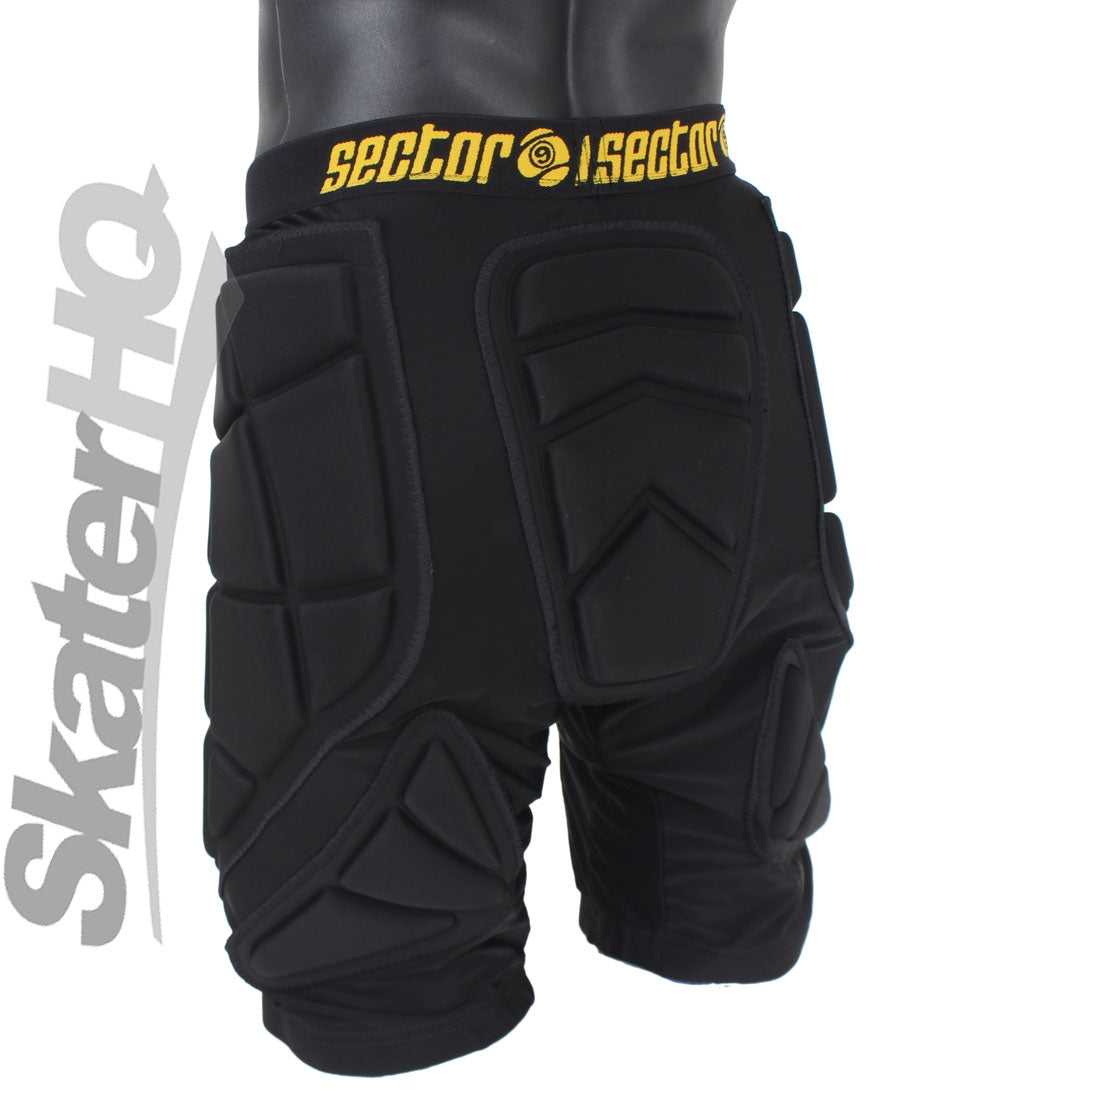 Sector 9 Pression Shorts Black - Small Protective Gear